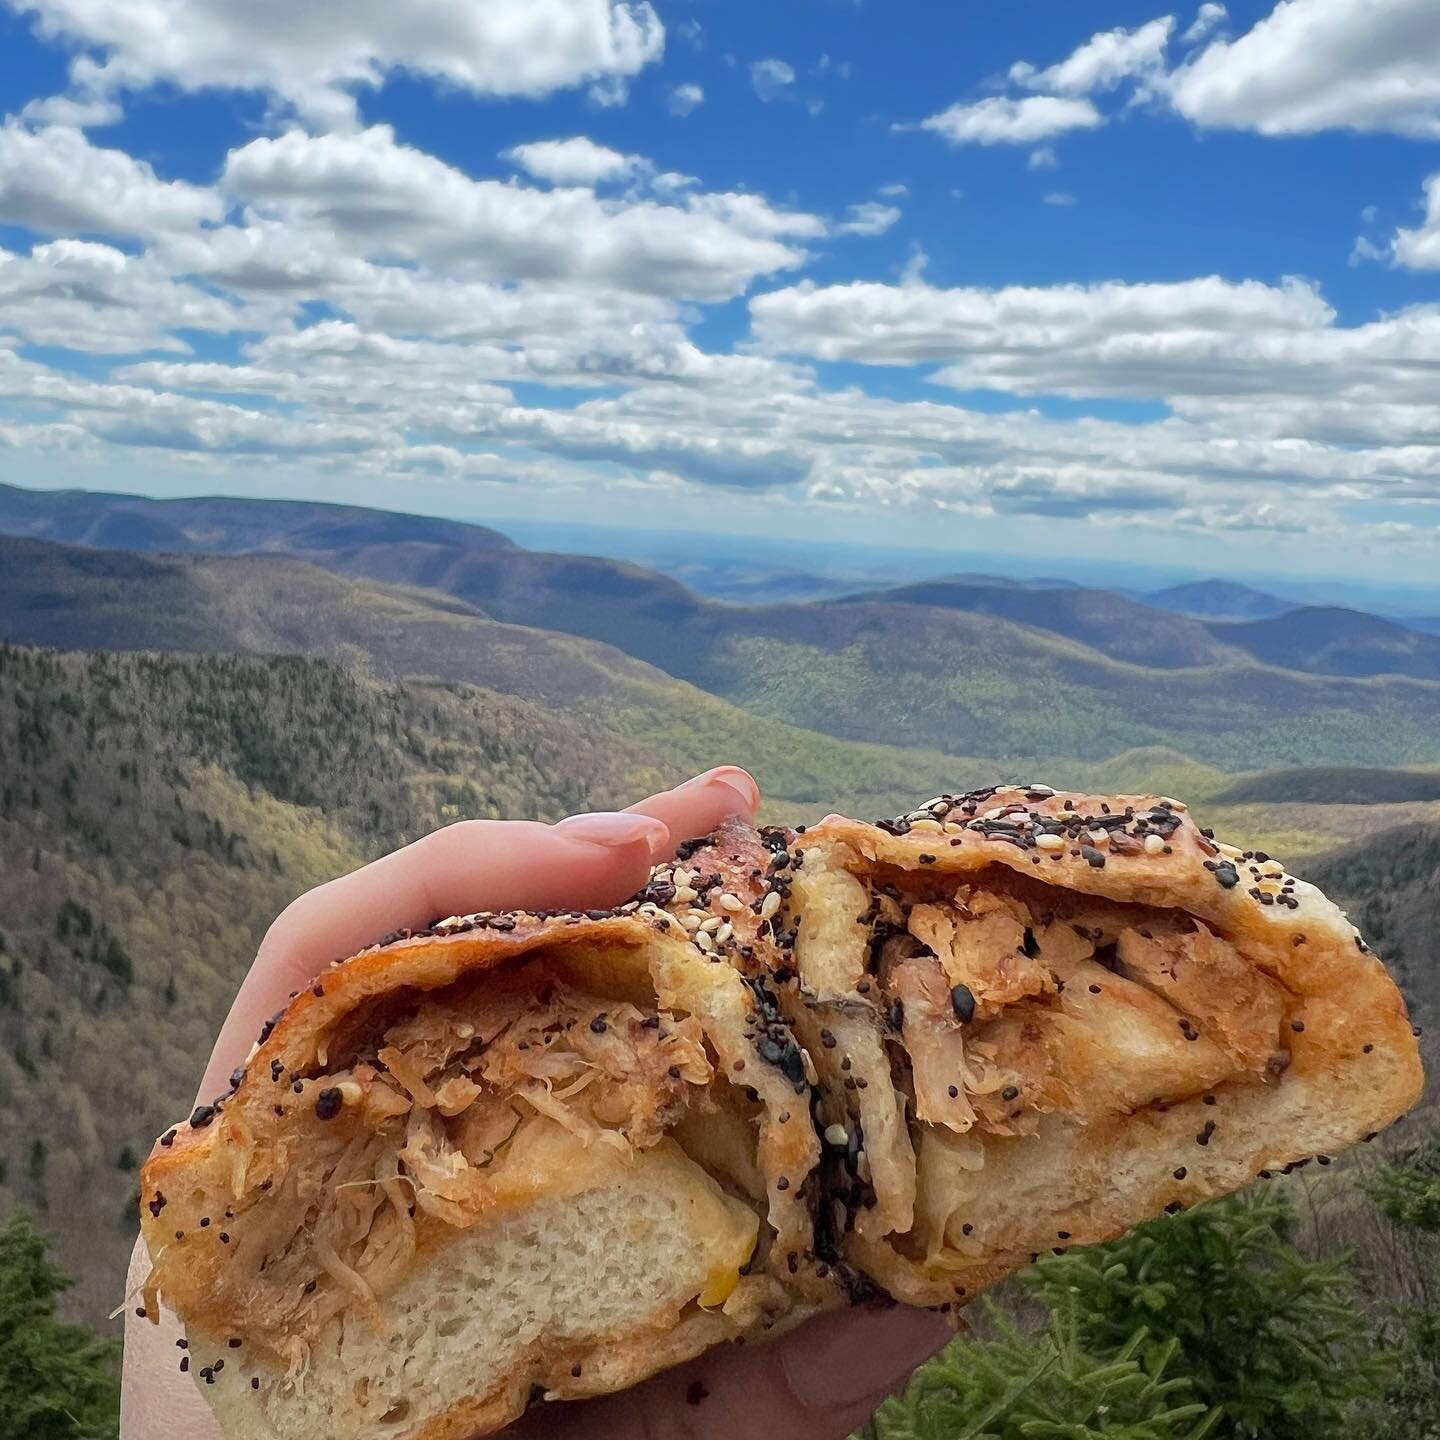 Not sure which view we&rsquo;re more excited about&hellip;

Featuring @moonrisebagels May Special: Slow Roasted Pulled Pork Stuffed Everything Bagel